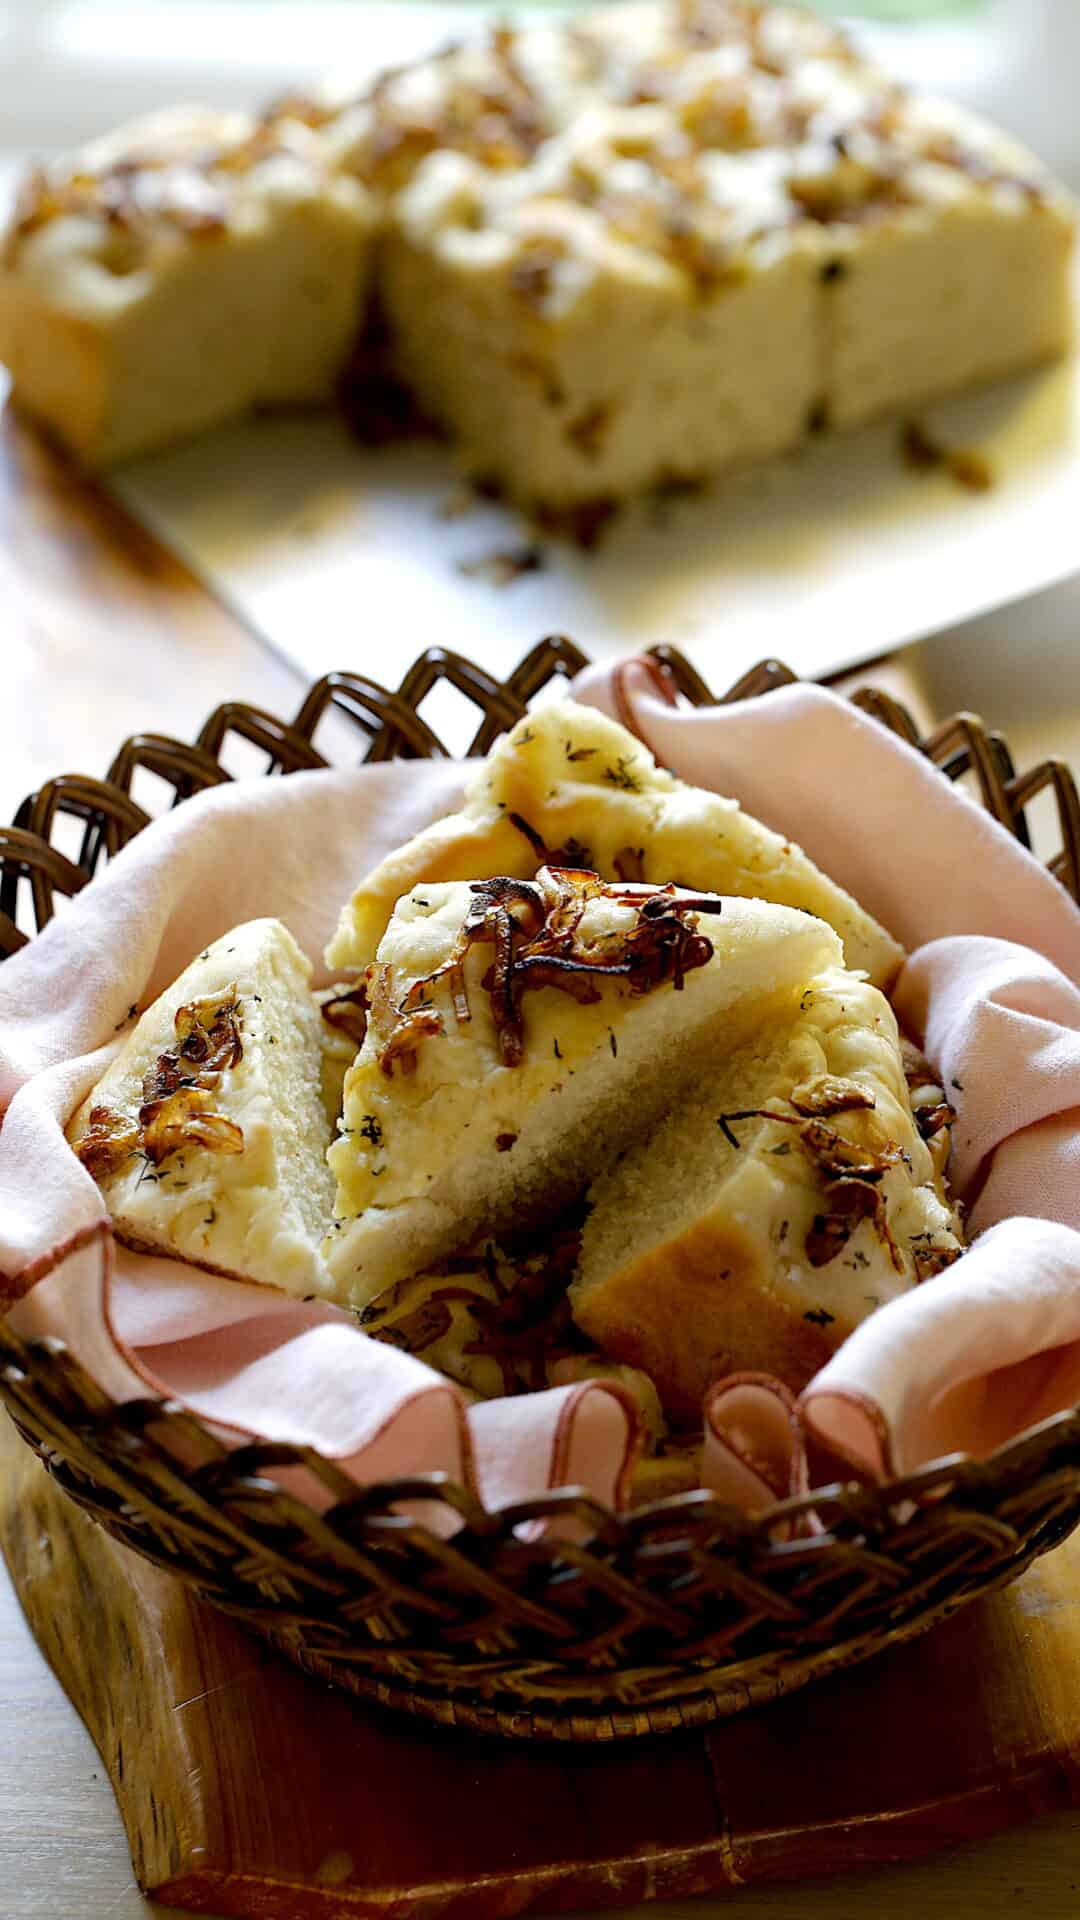 A vertical image of a bread basket filled with a Focaccia bread slices with a pan of focaccia bread in the background